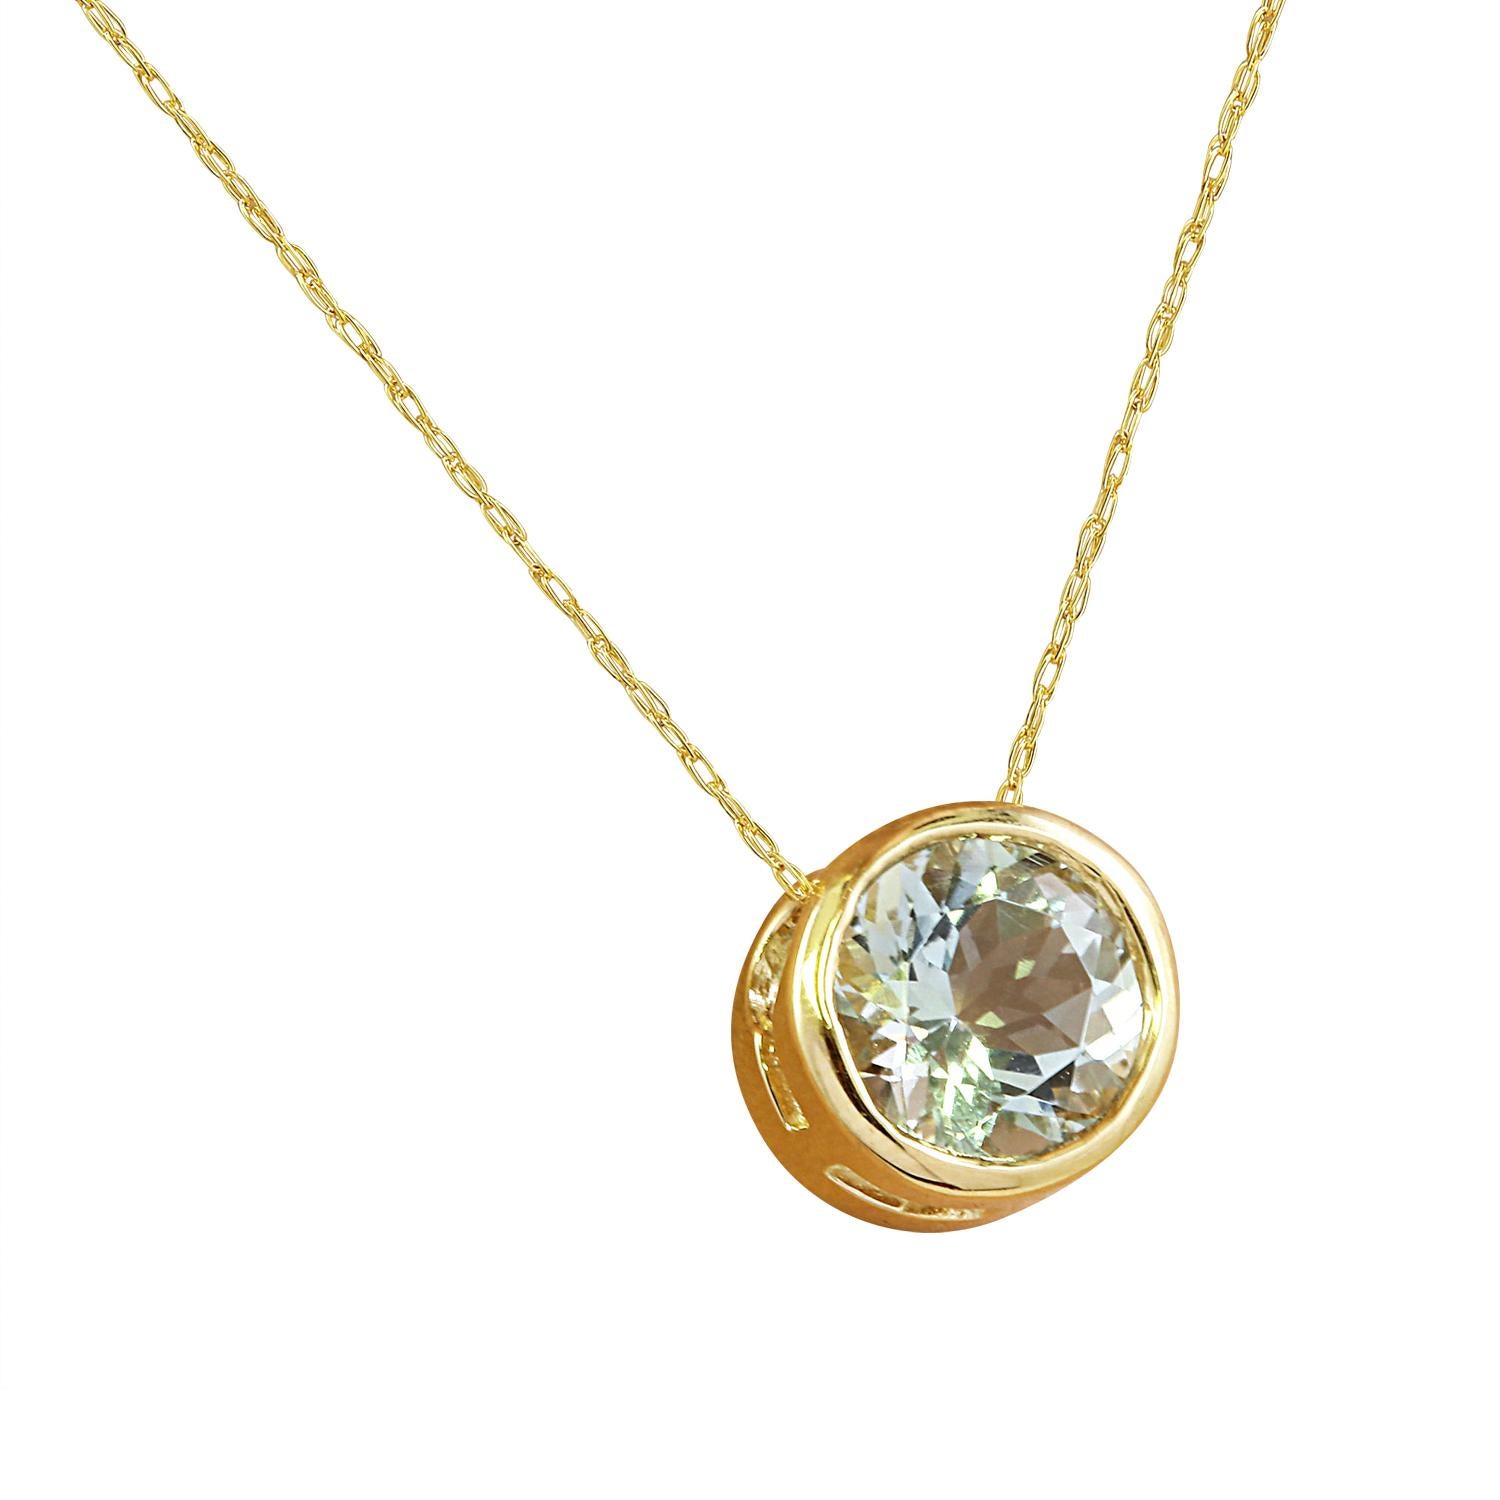 1.50 Carat Aquamarine 14K Yellow Gold Necklace
Stamped: 14K
Total Necklace Weight: 1.4 Grams
Length: 16 Inches
Aquamarine Weight: 1.50 Carat (6.50x6.50 Millimeters) 
Face Measures: 8.20x8.20 Millimeter 
SKU: [600192]